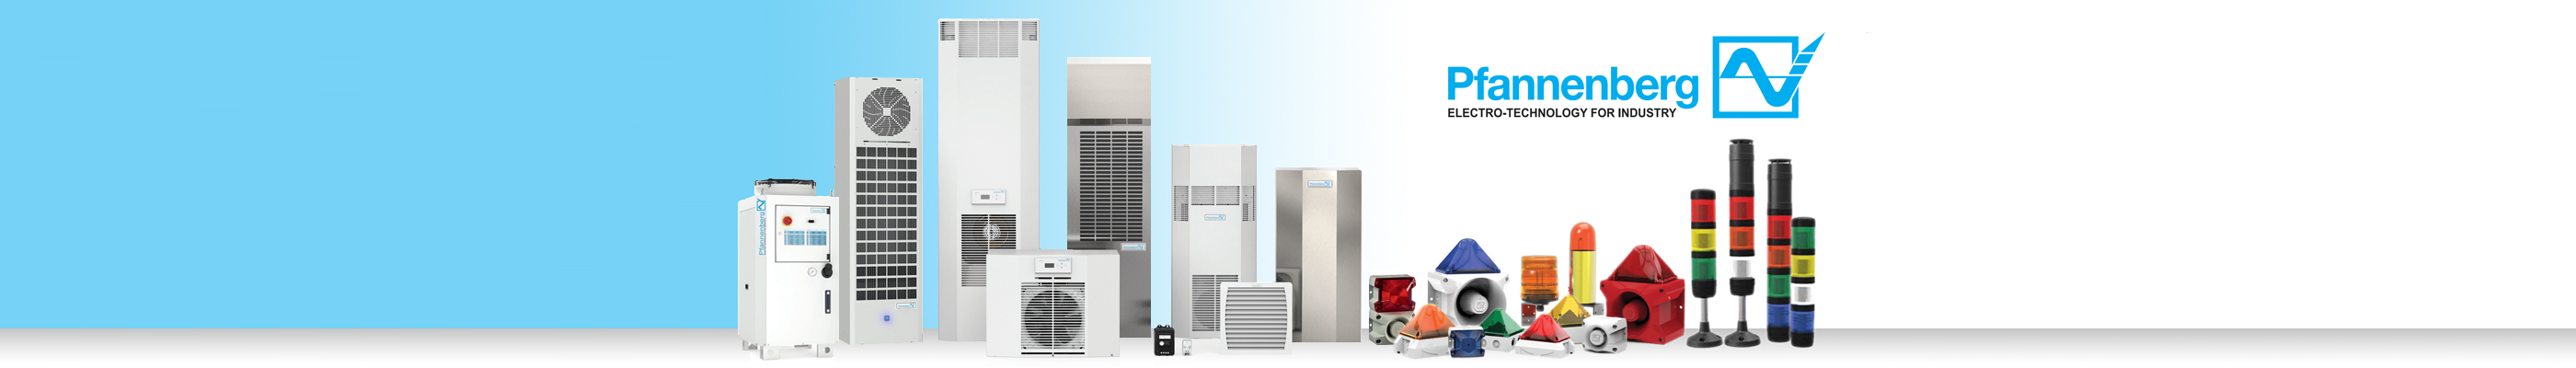 Pfannenberg all products header image